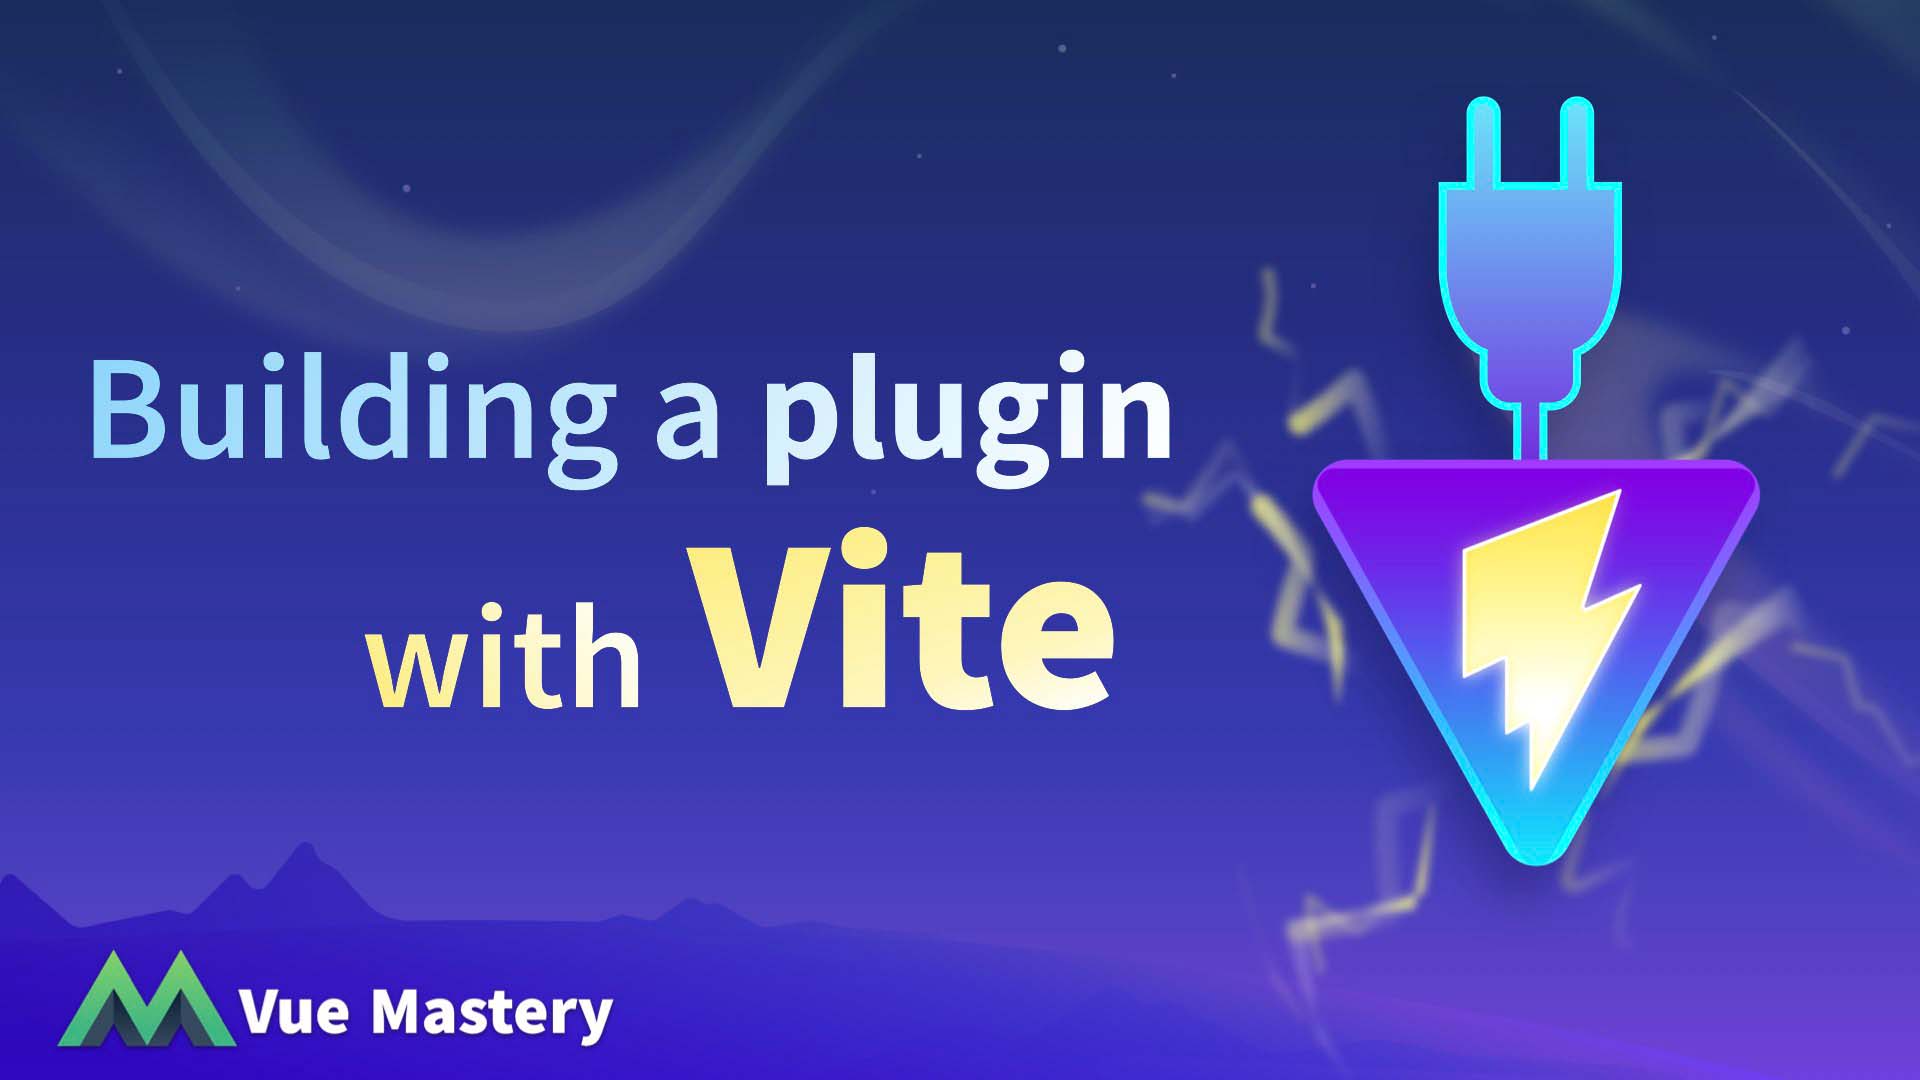 Building a plugin with Vite